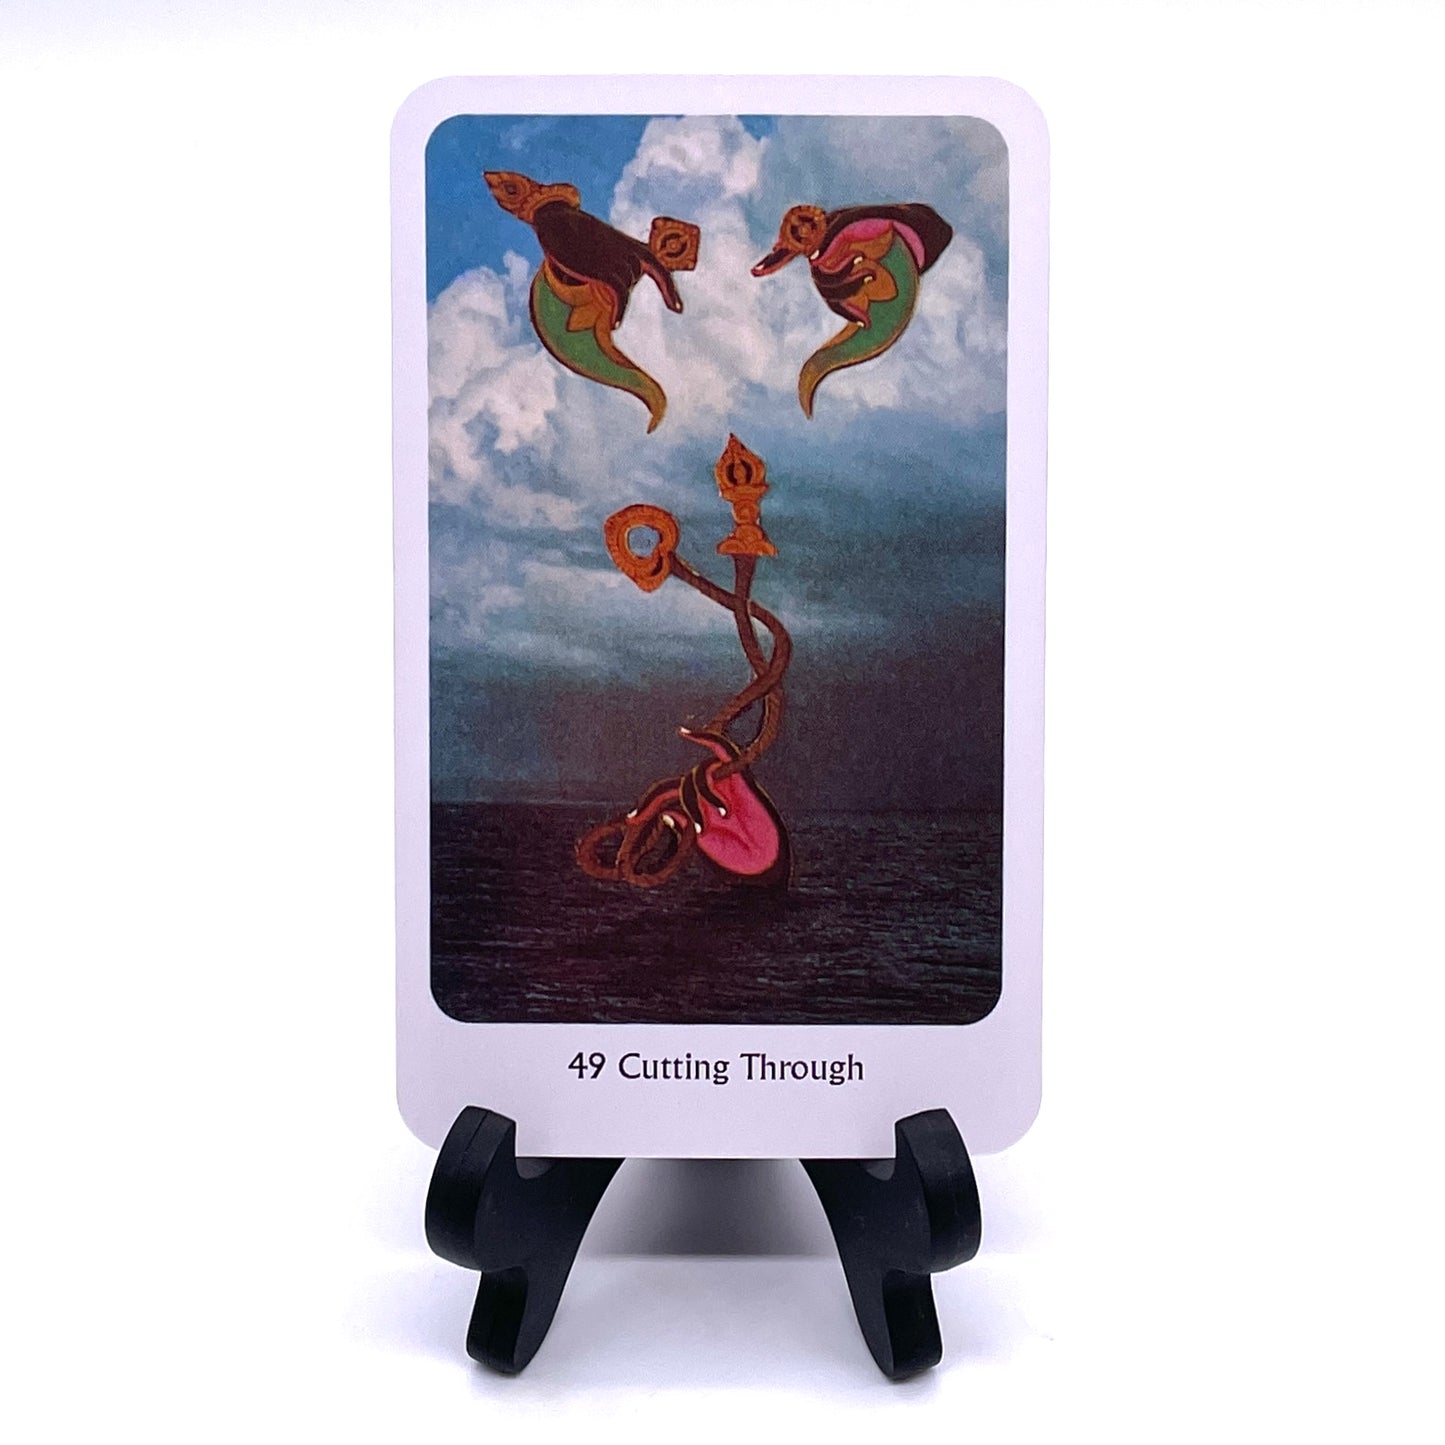 Photo of Card #49, "Cutting Through", featuring collaged images of oil lamps over a hand holding twisted scepters against an oceanscape background.